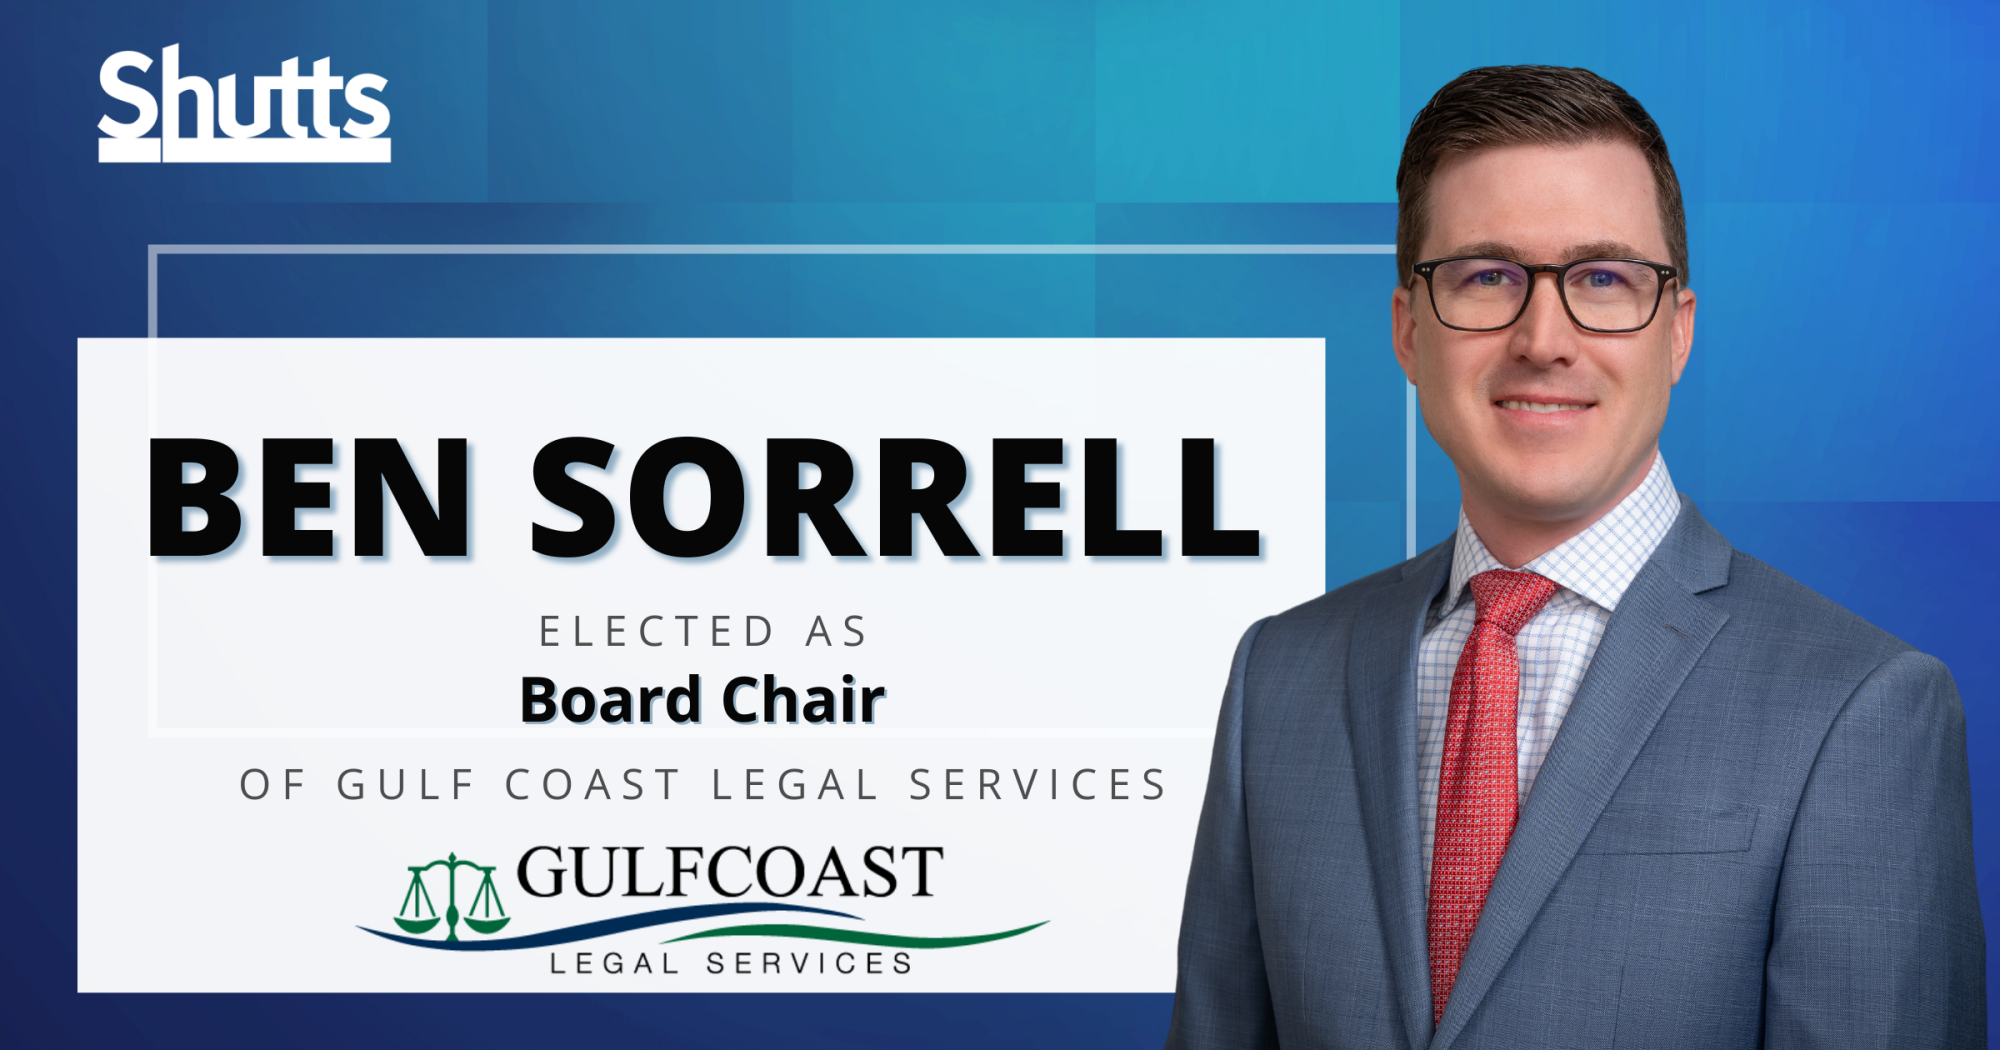 Benjamin Sorrell Elected as Board Chair of Gulf Coast Legal Services